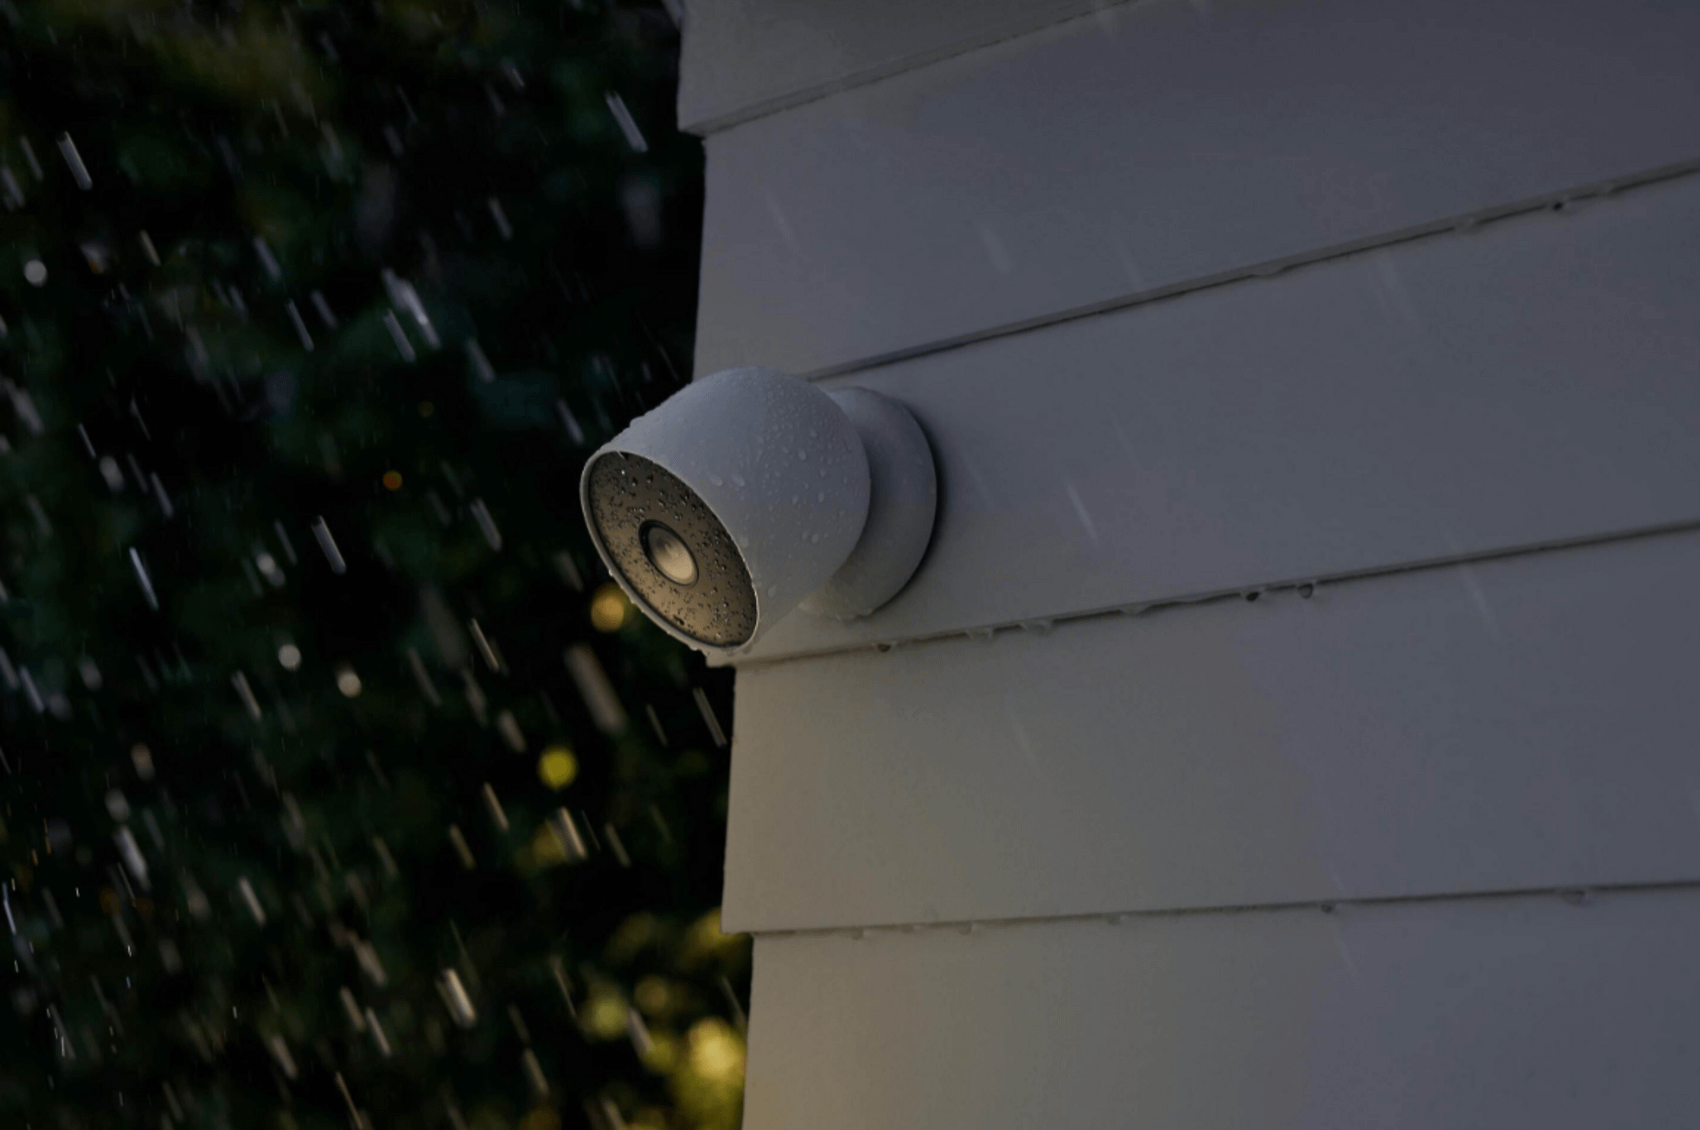 Ring security camera on the wall in a rainy day